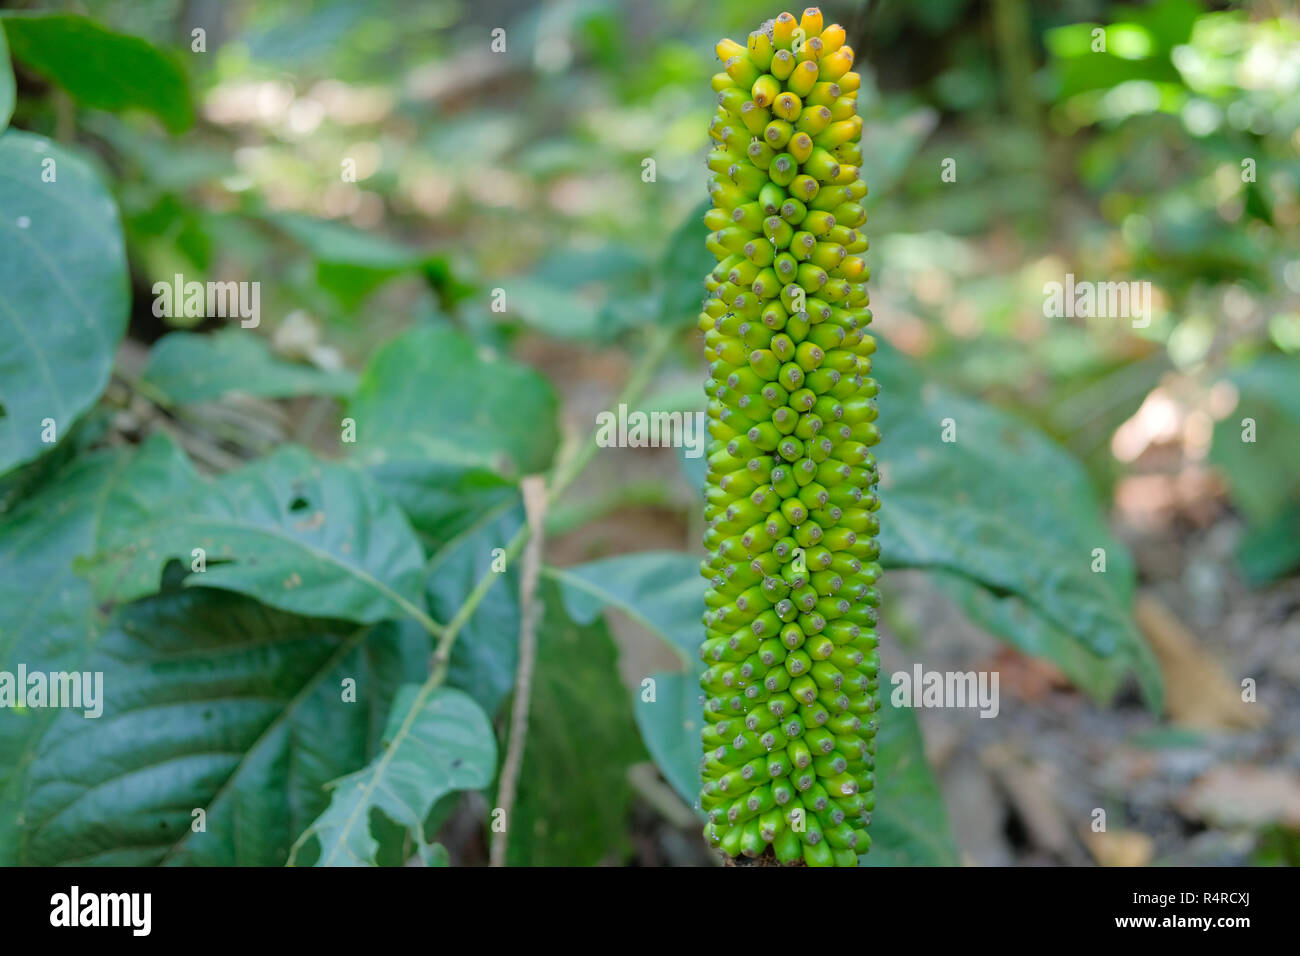 elephant foot yam growing in tropical forest. Stock Photo